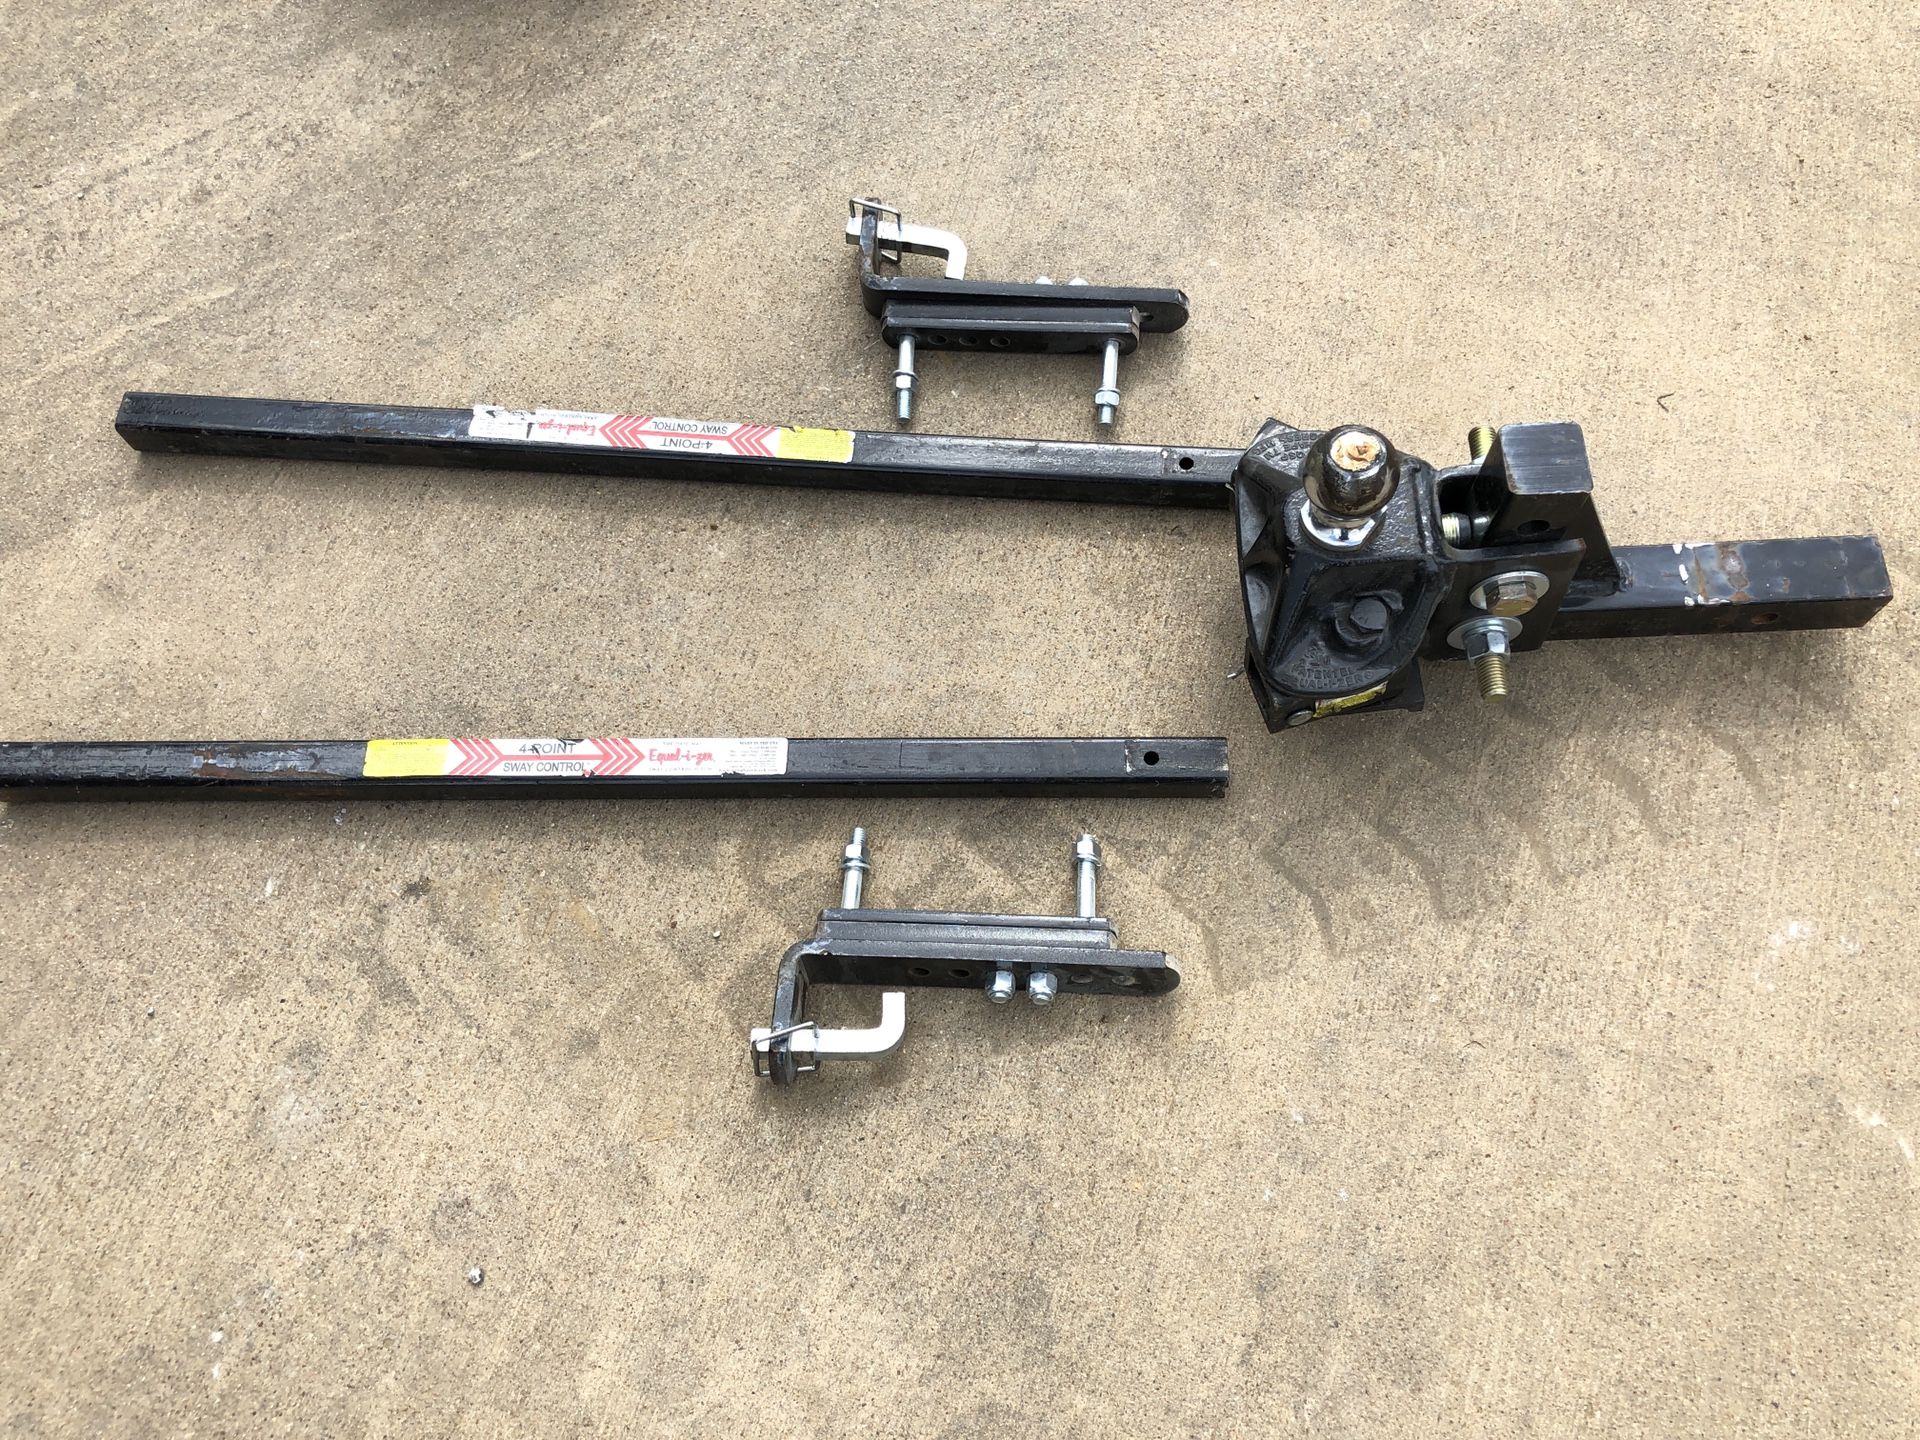 Equal-i-zer 4 Point Sway Control Hitch 12K lbs.